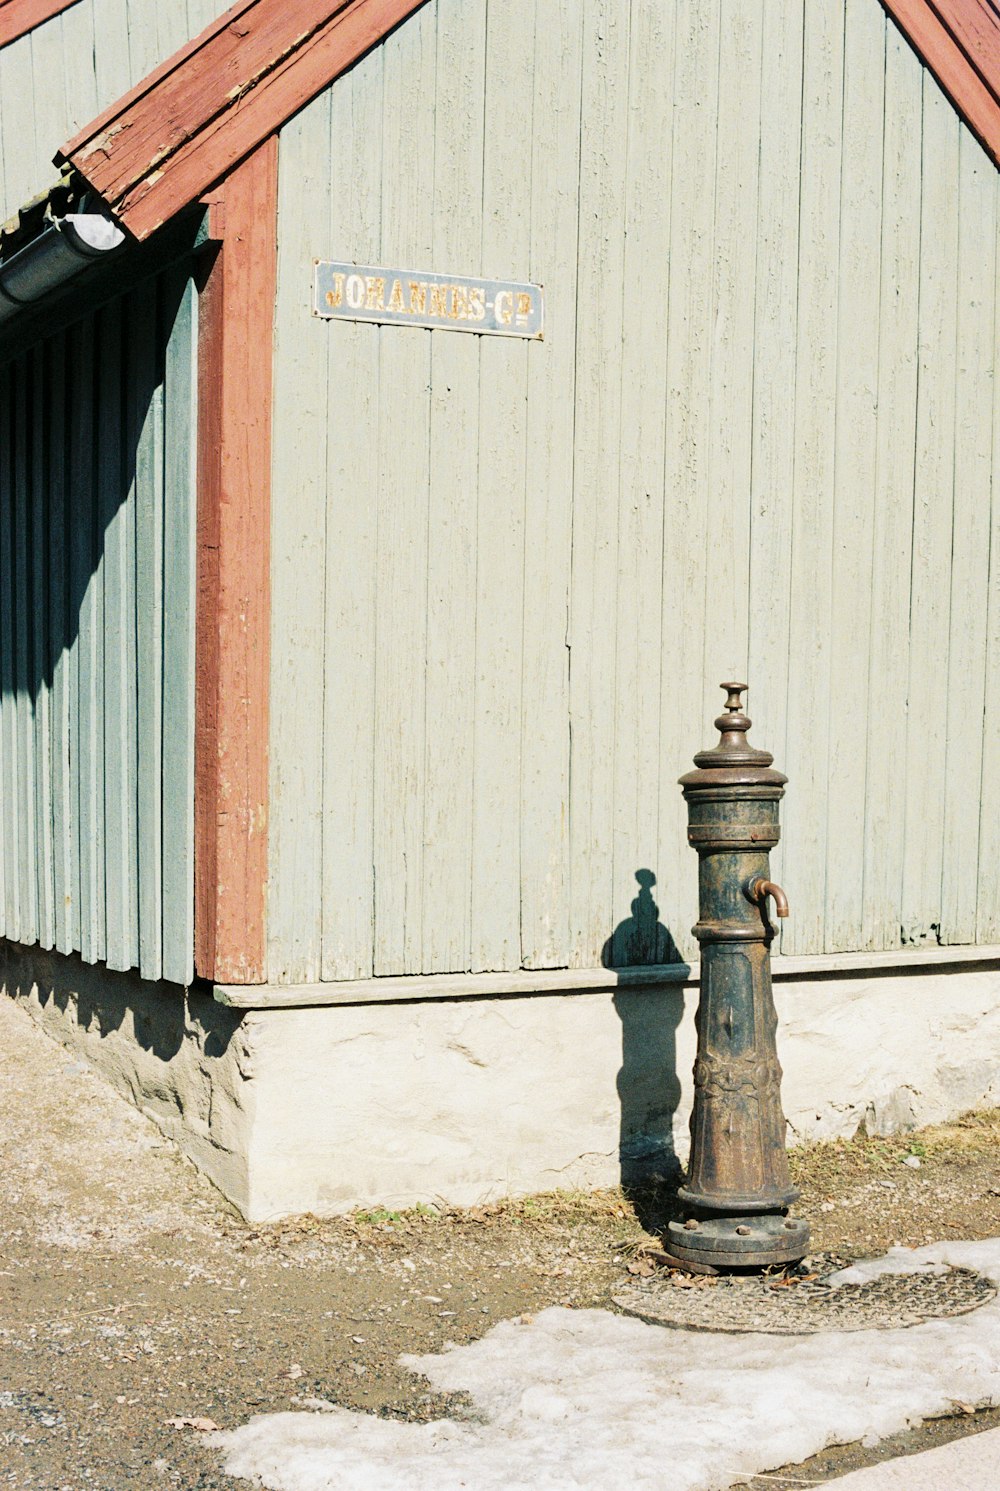 a rusted fire hydrant in front of a building